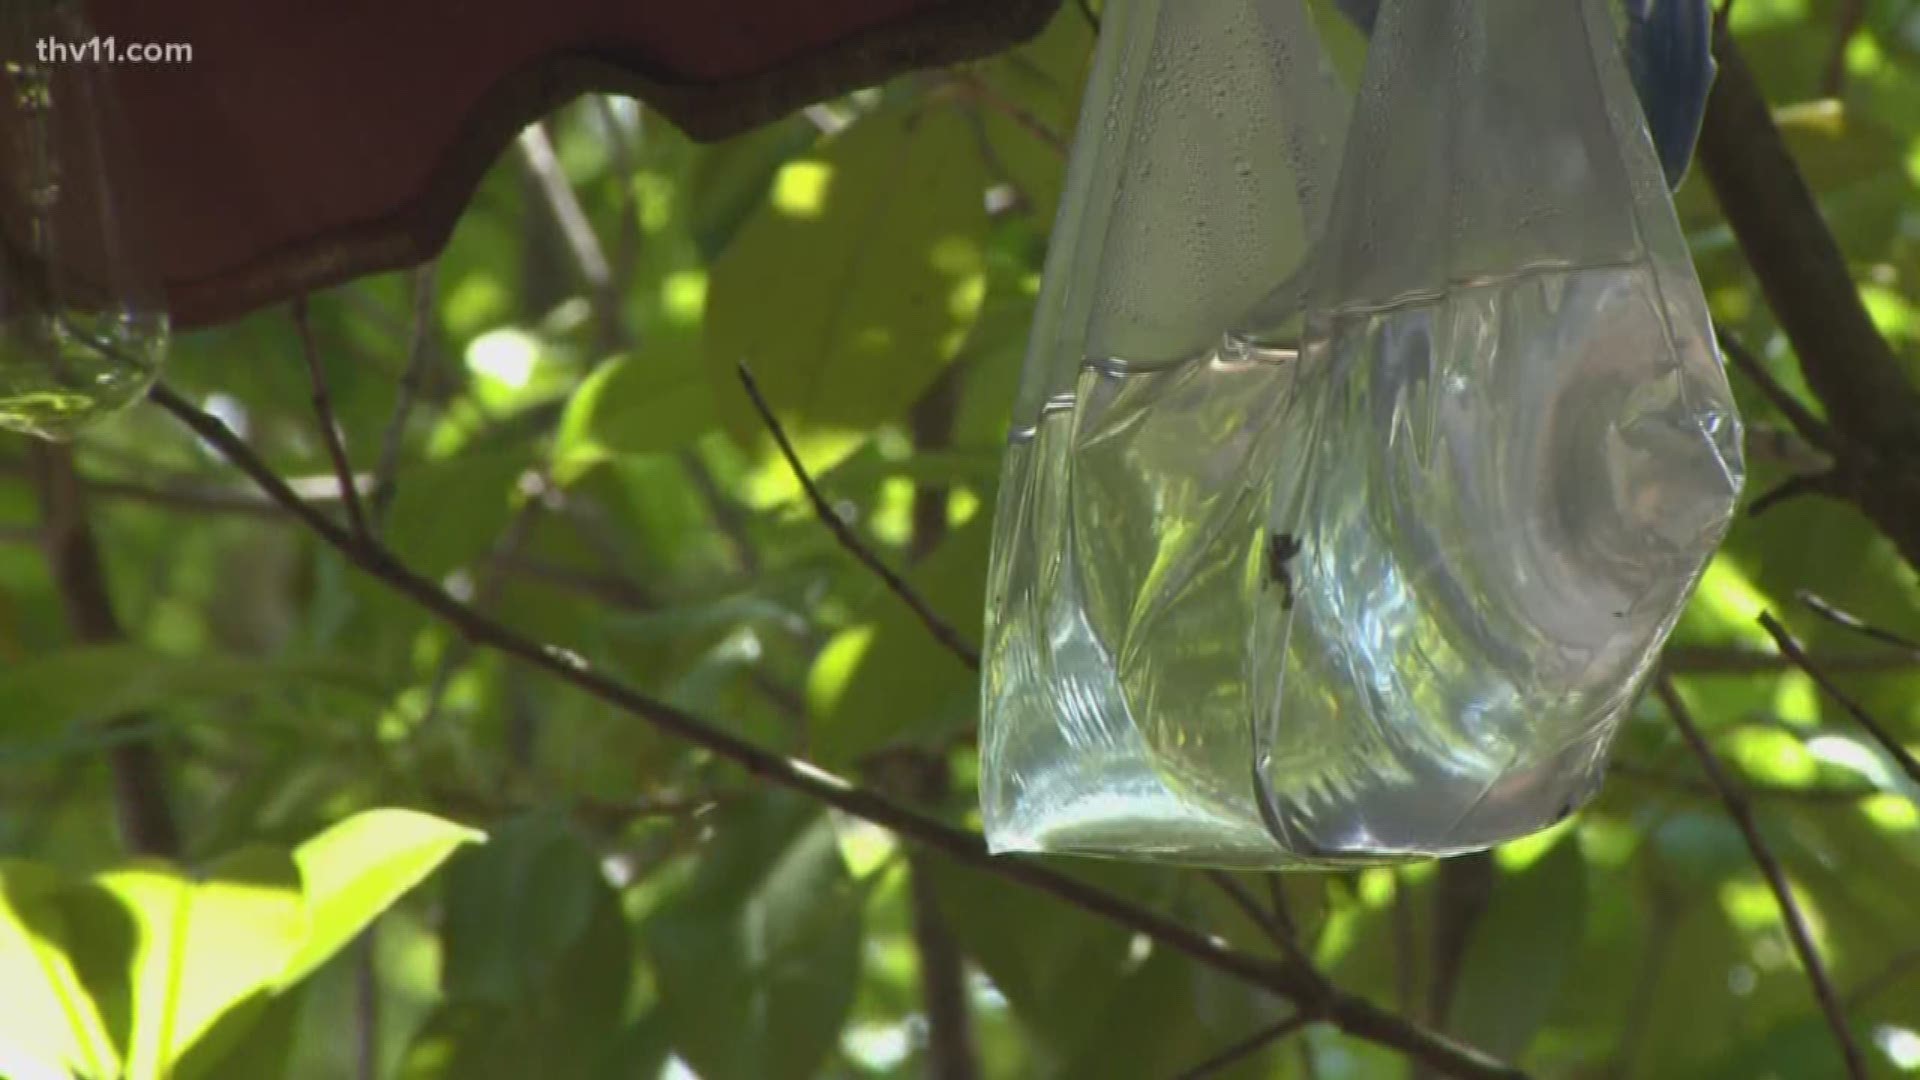 Does hanging bags of water outside keep bugs away?